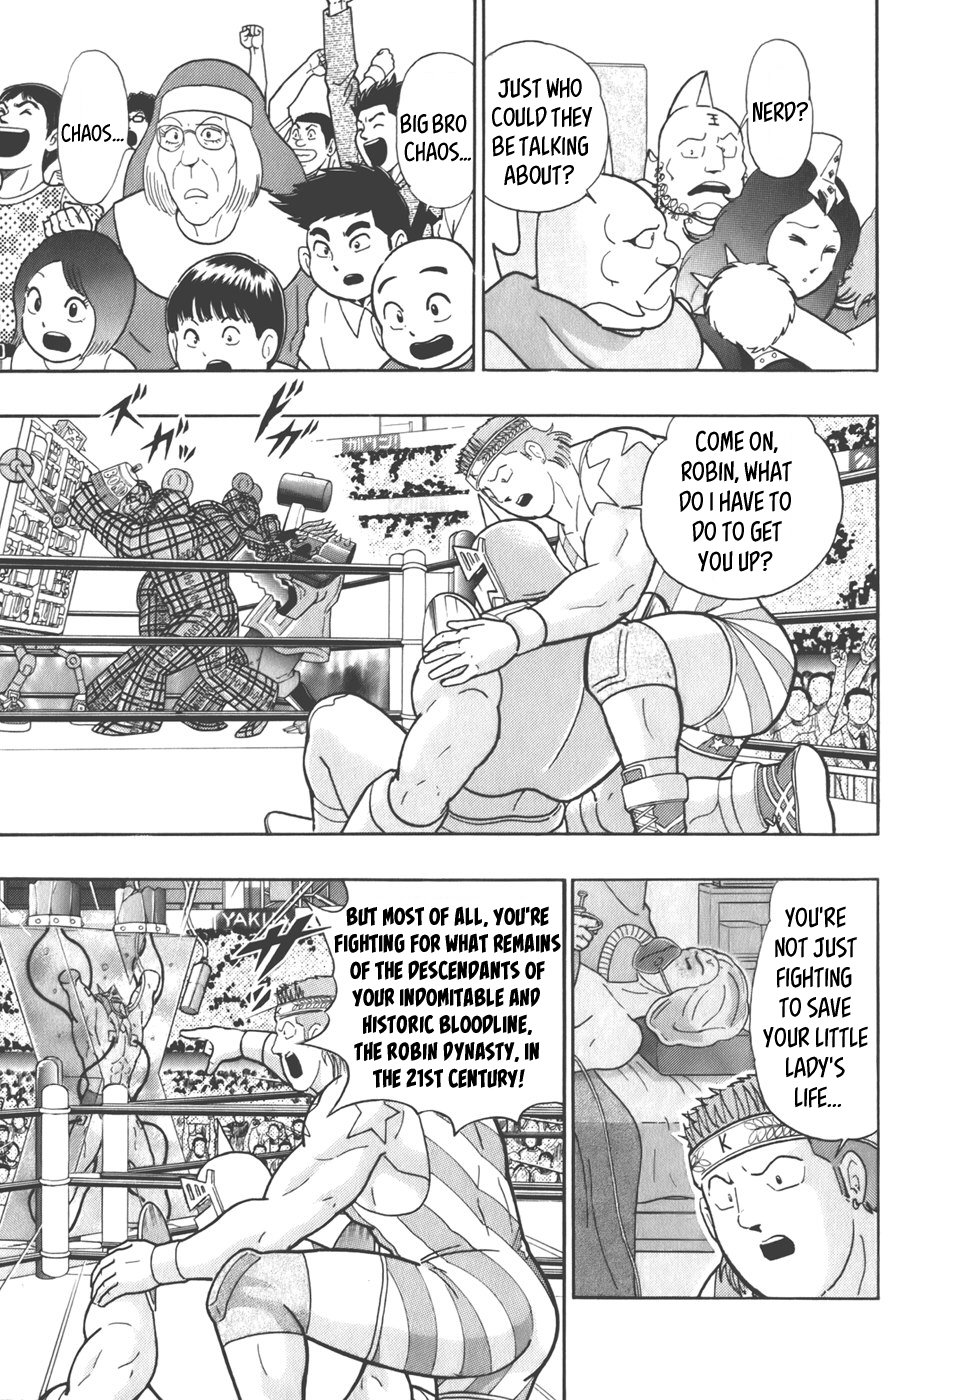 Kinnikuman Nisei: Ultimate Chojin Tag Vol. 4 Ch. 38 Win the Free for all With "The Ultimate Finisher"!